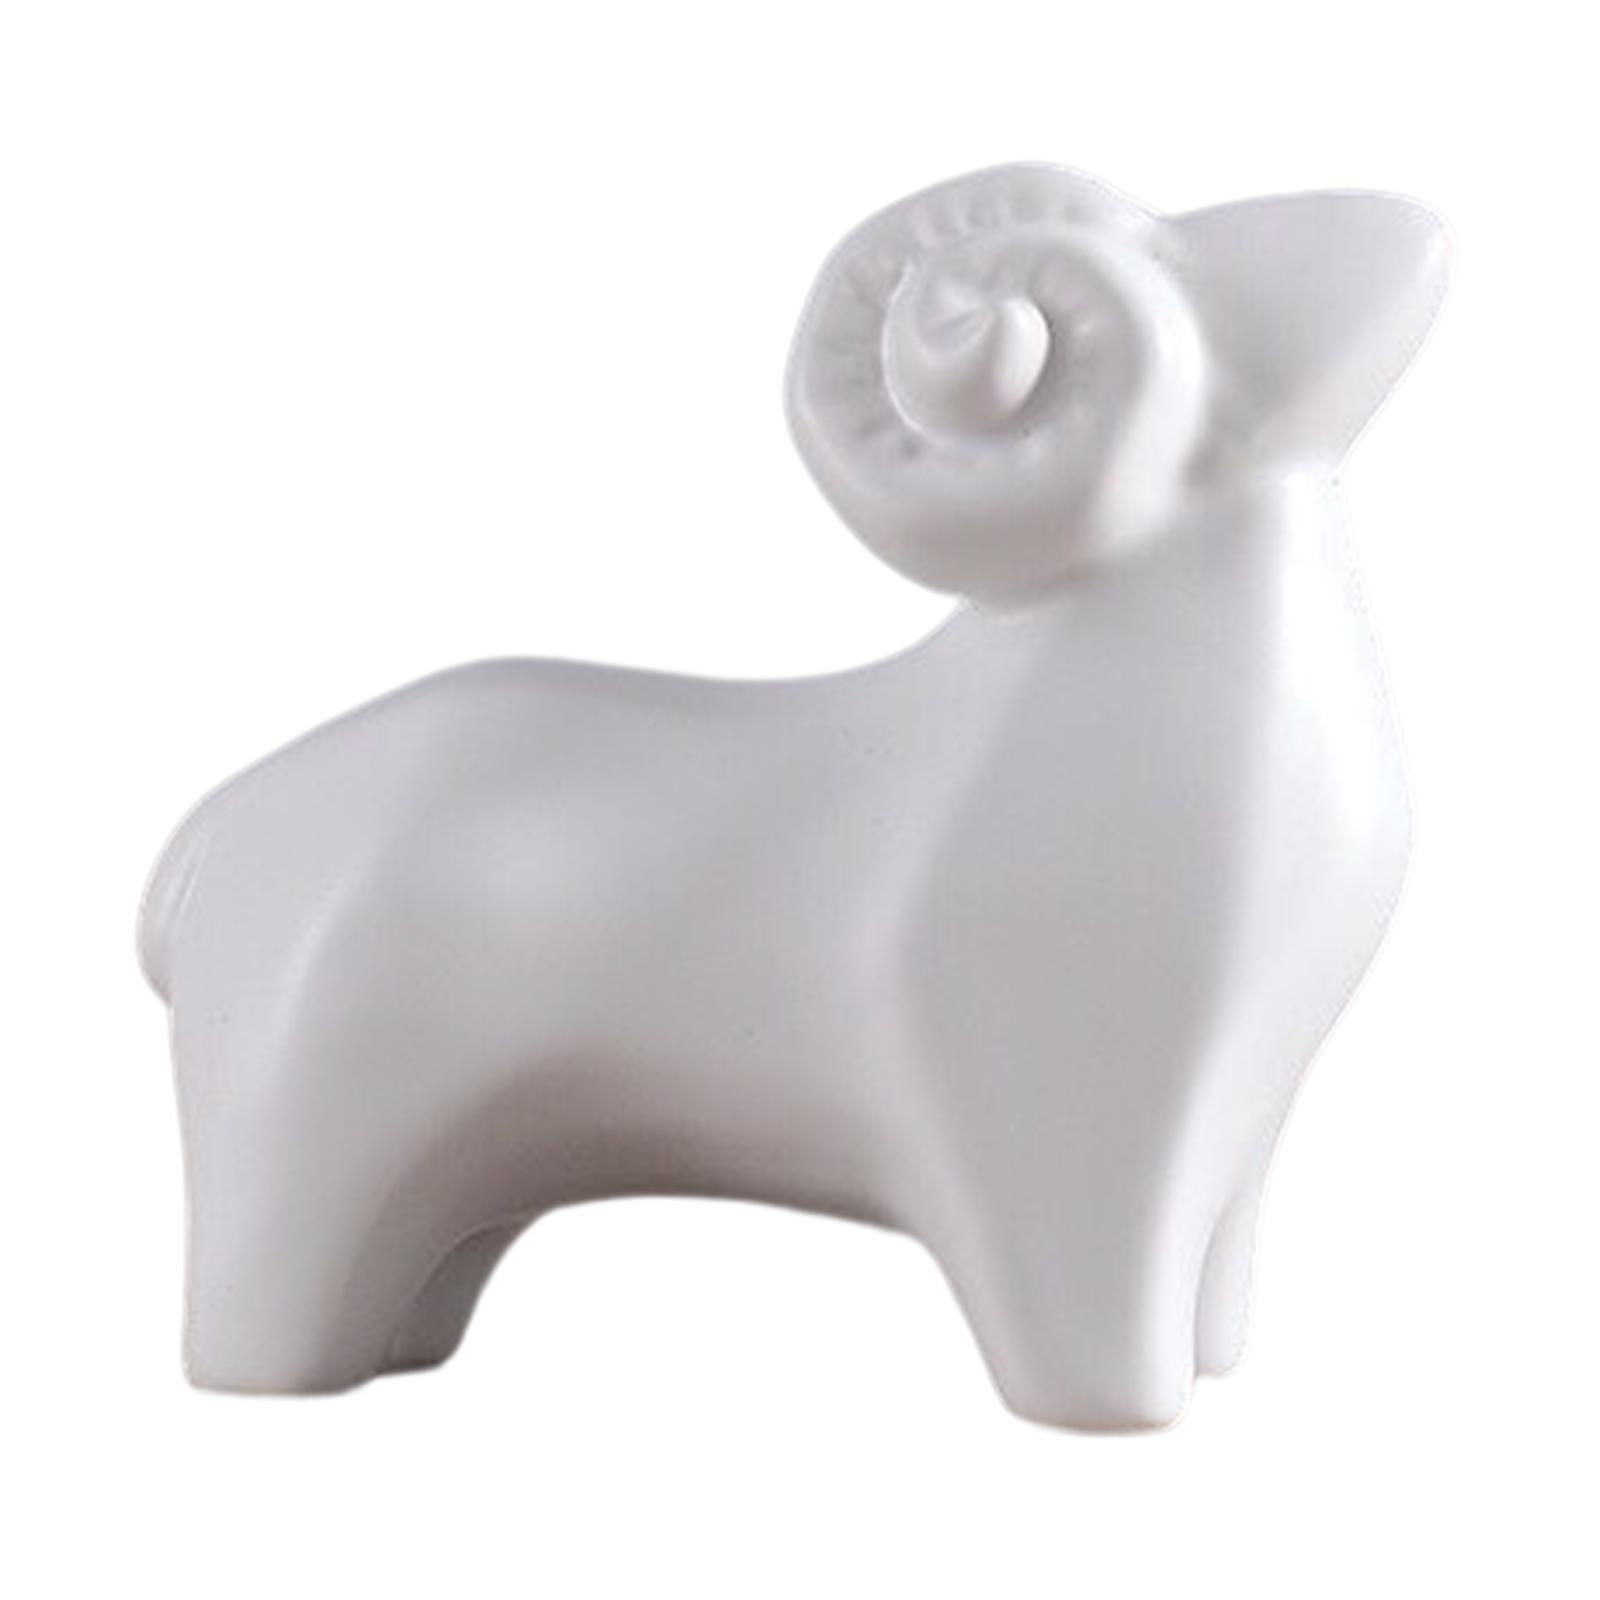 Creative Sheep Statue, Porcelain Nordic Collectable Ornament Animal Figurine for Desktop Bedroom Shop Bookshelf Decoration White Small - image 2 of 8